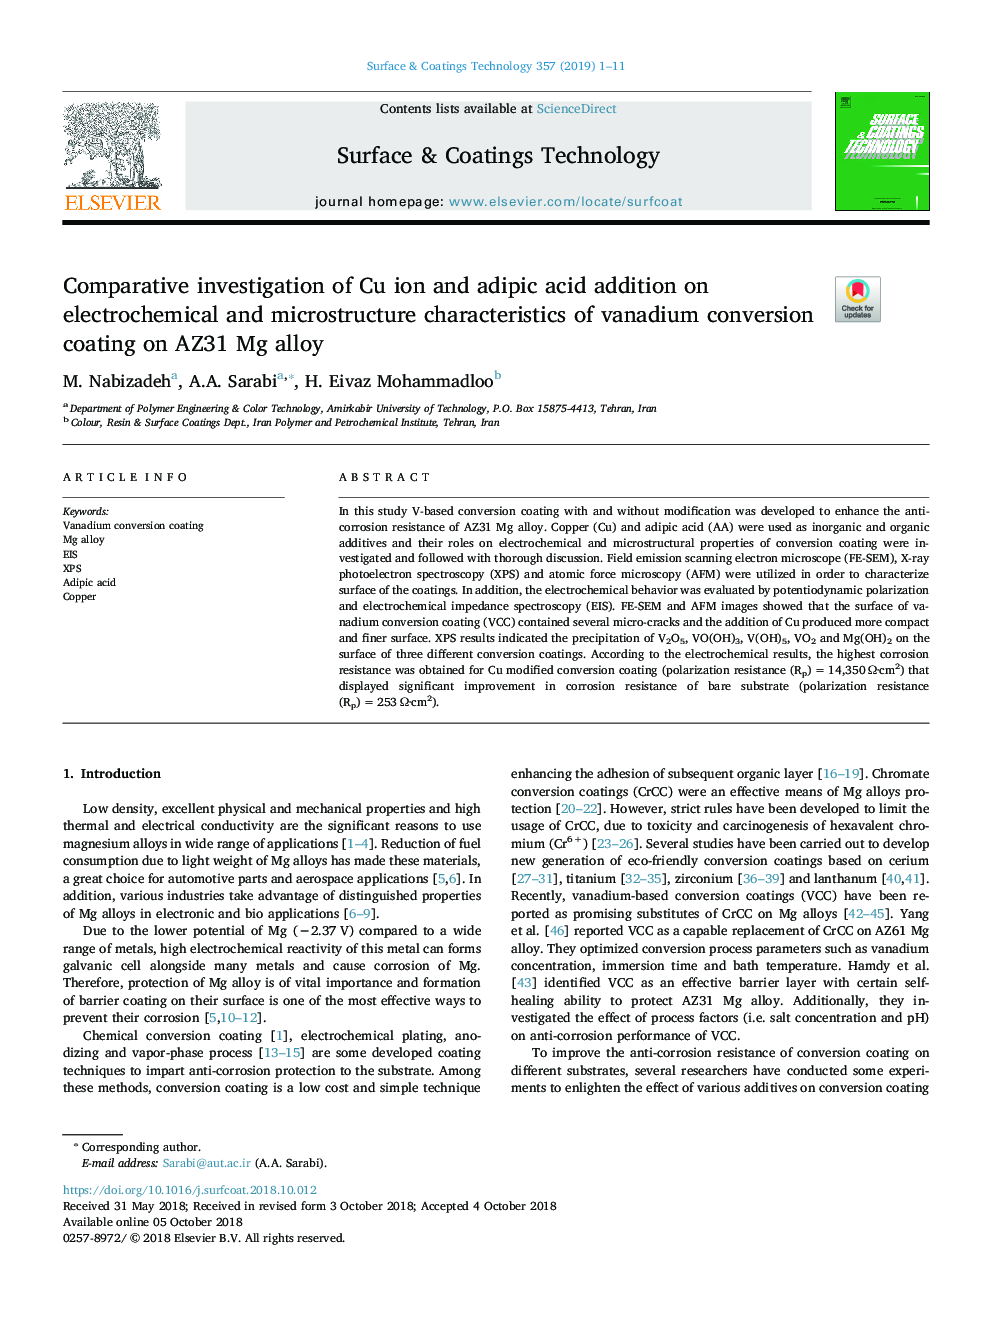 Comparative investigation of Cu ion and adipic acid addition on electrochemical and microstructure characteristics of vanadium conversion coating on AZ31 Mg alloy